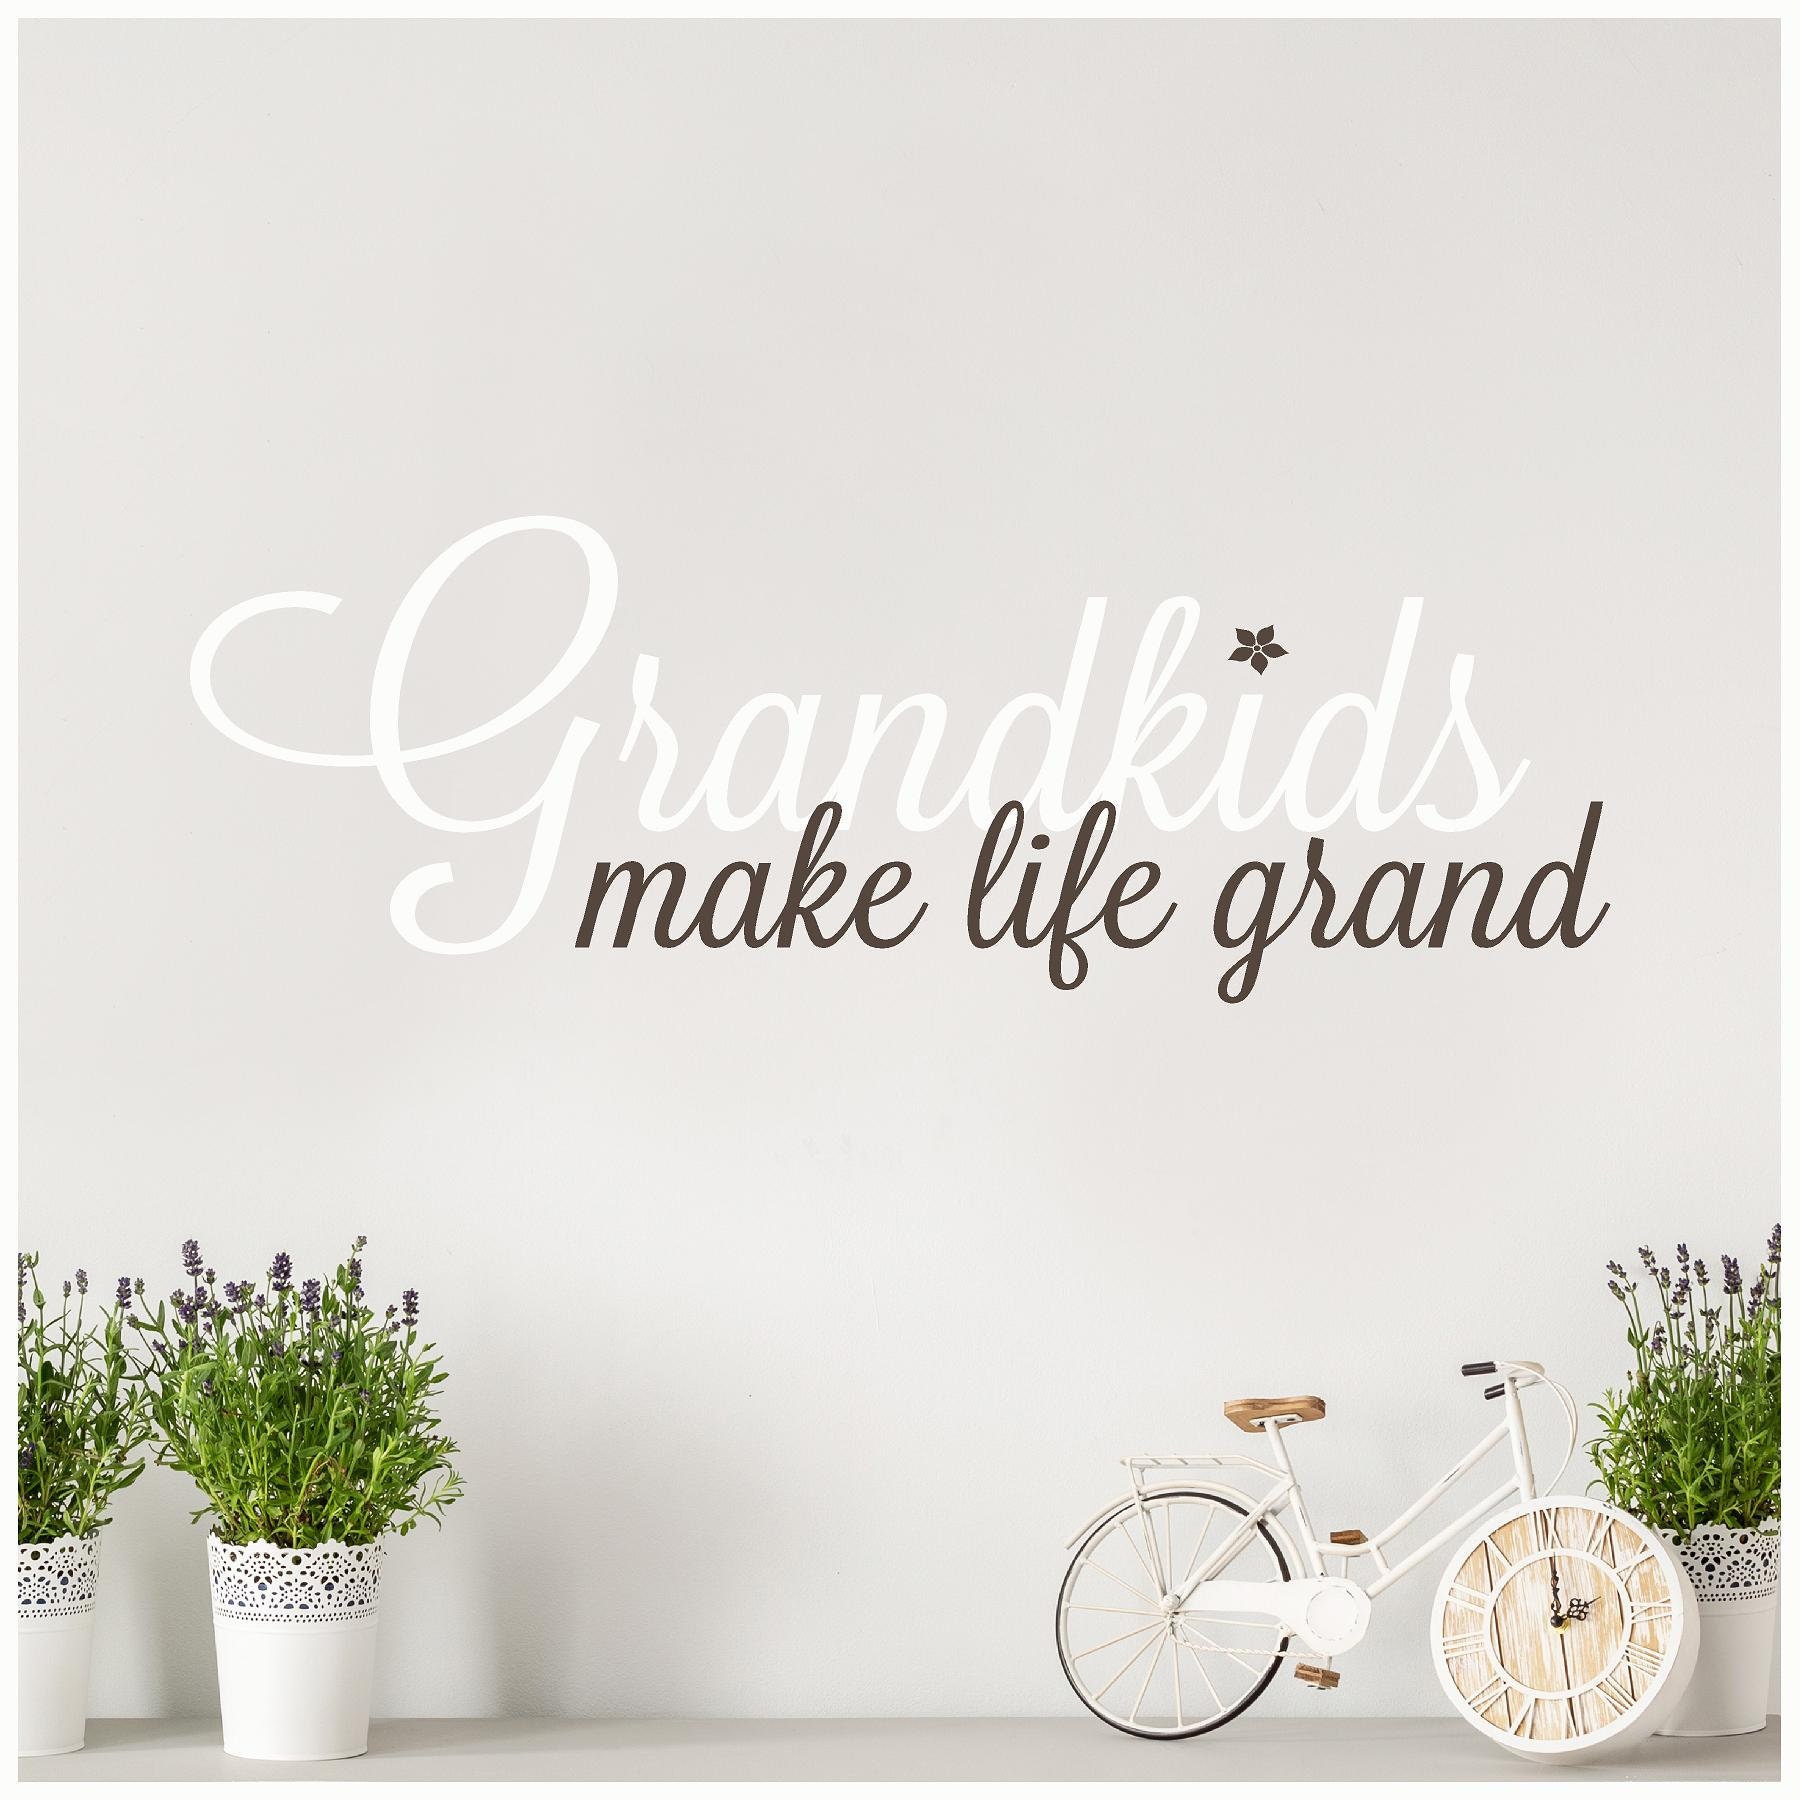 Grandkids Make Life Grand Customizable Wall Decal Vinyl Lettering Decals Sticker Words